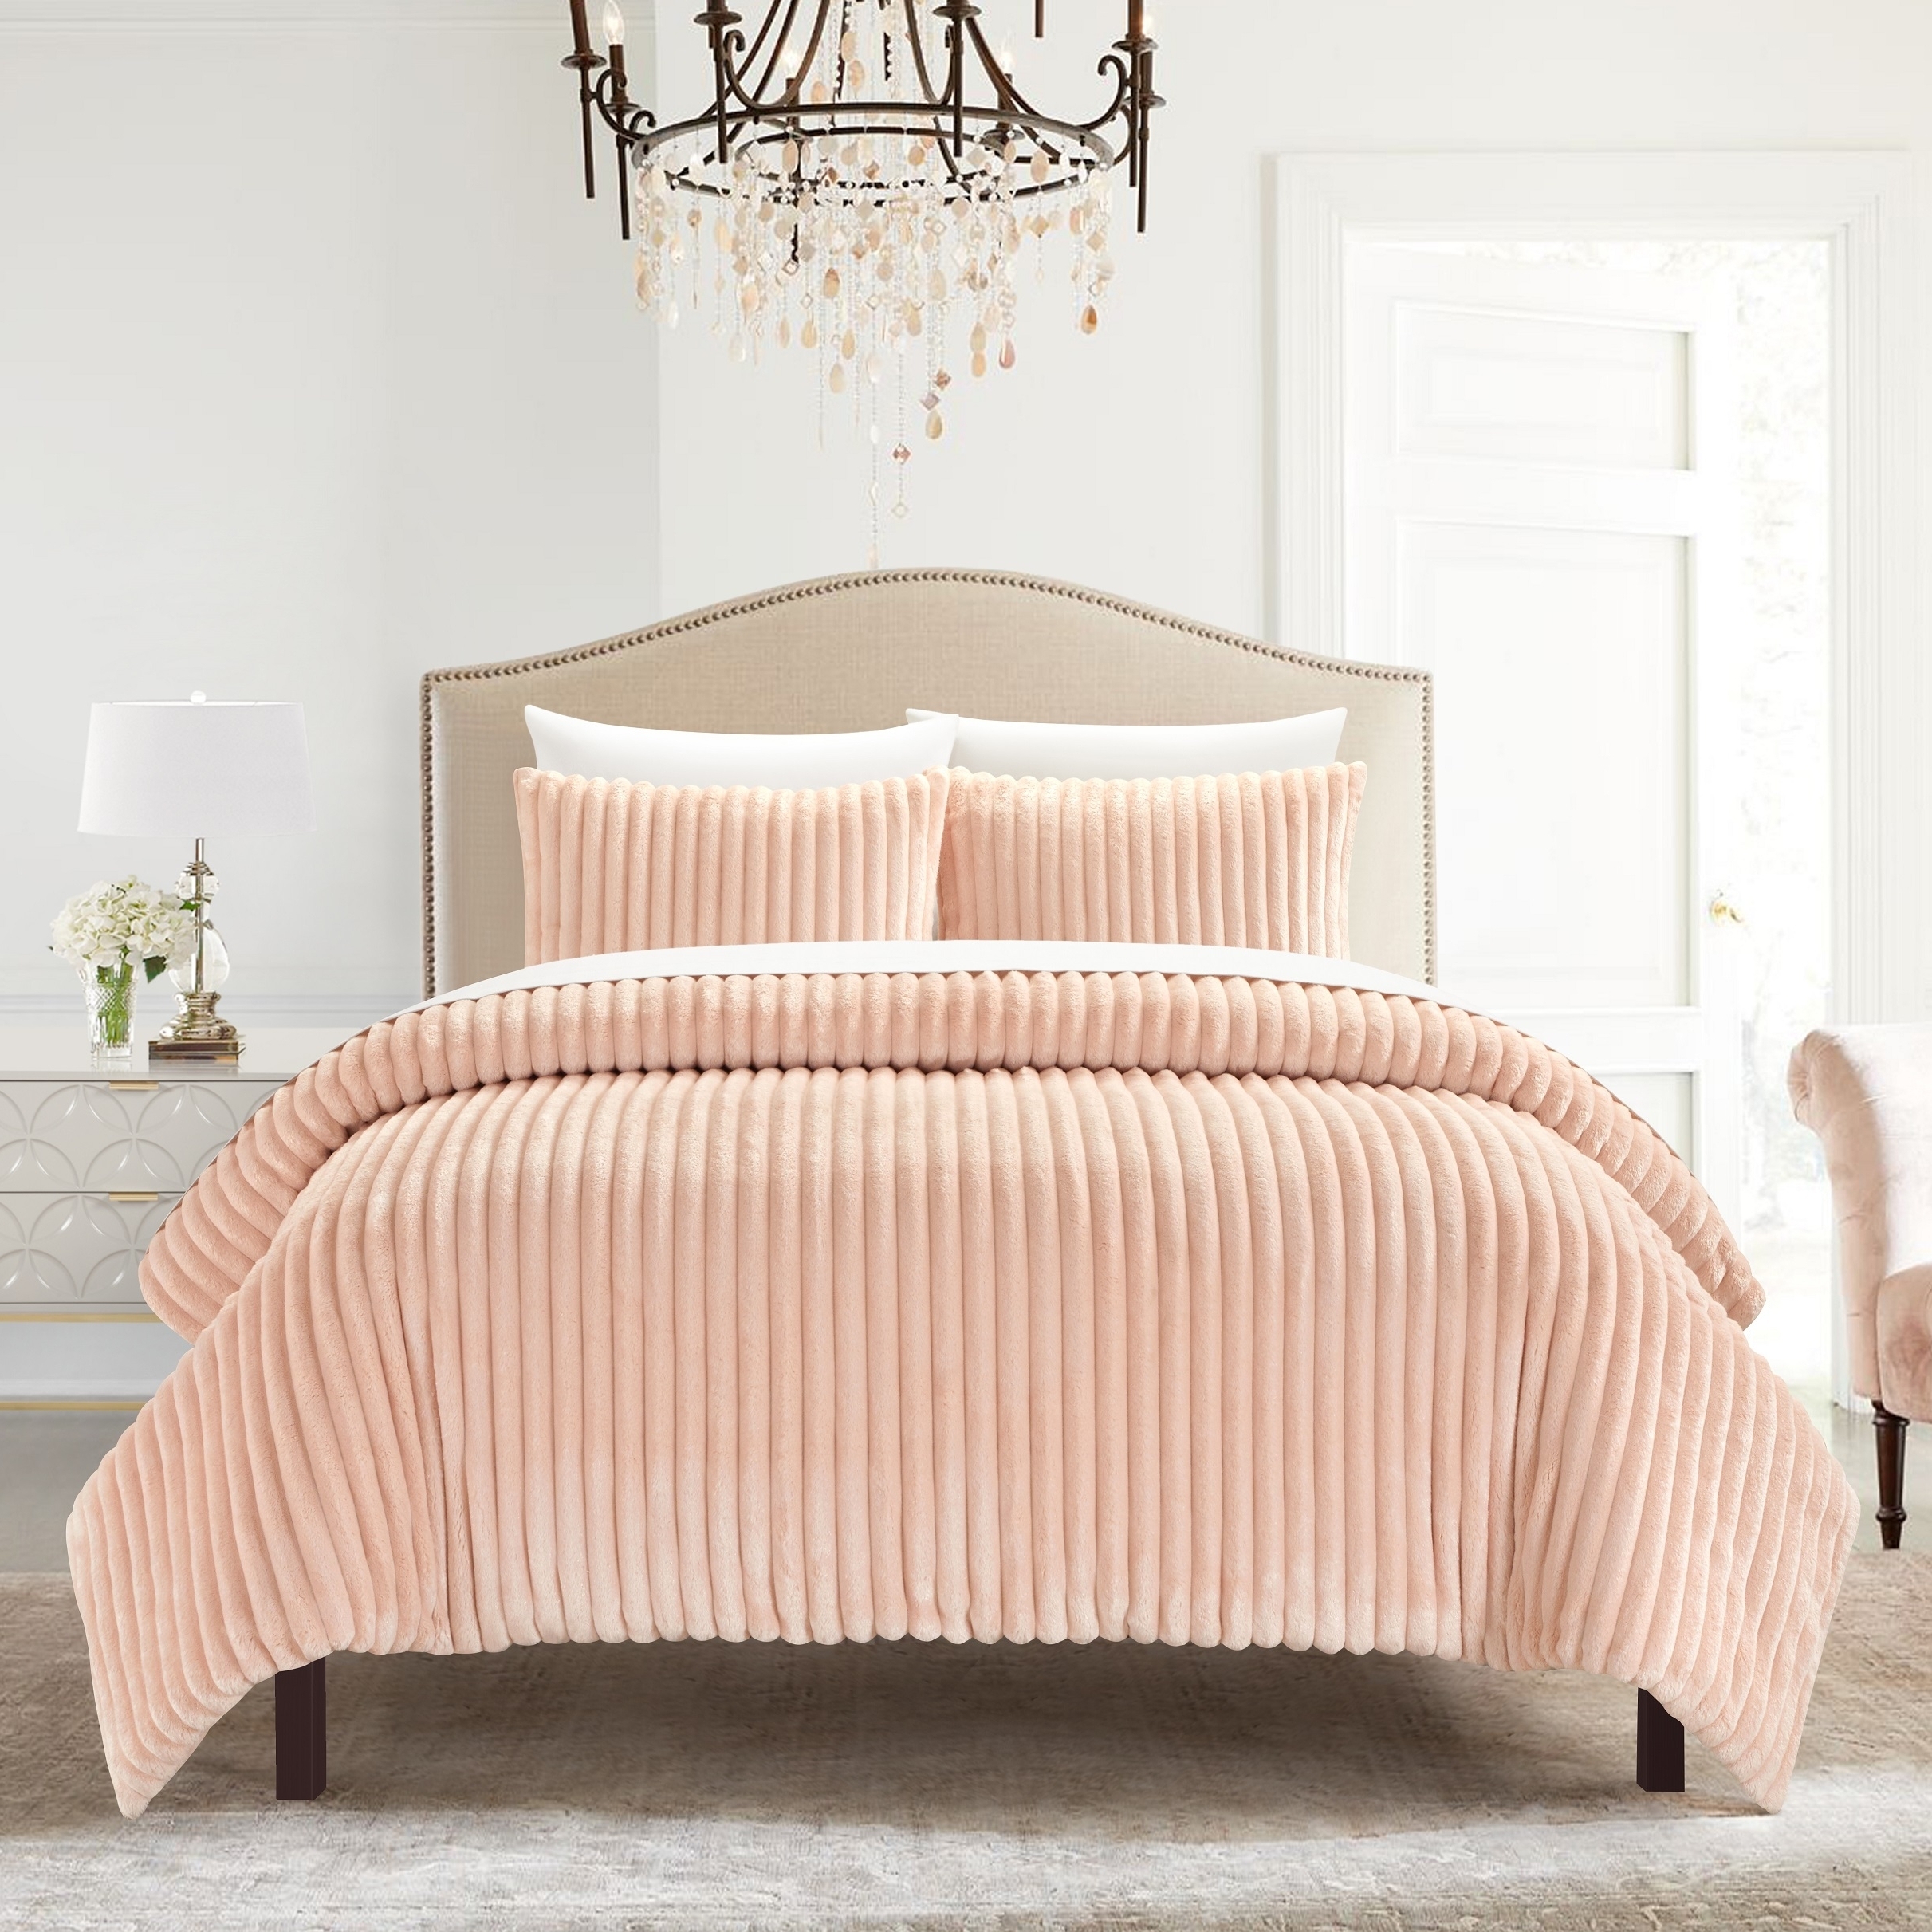 Pabrico 3 Or 2 Piece Comforter Set Microplush Channel Quilted - Blush, Twin - 2 Piece